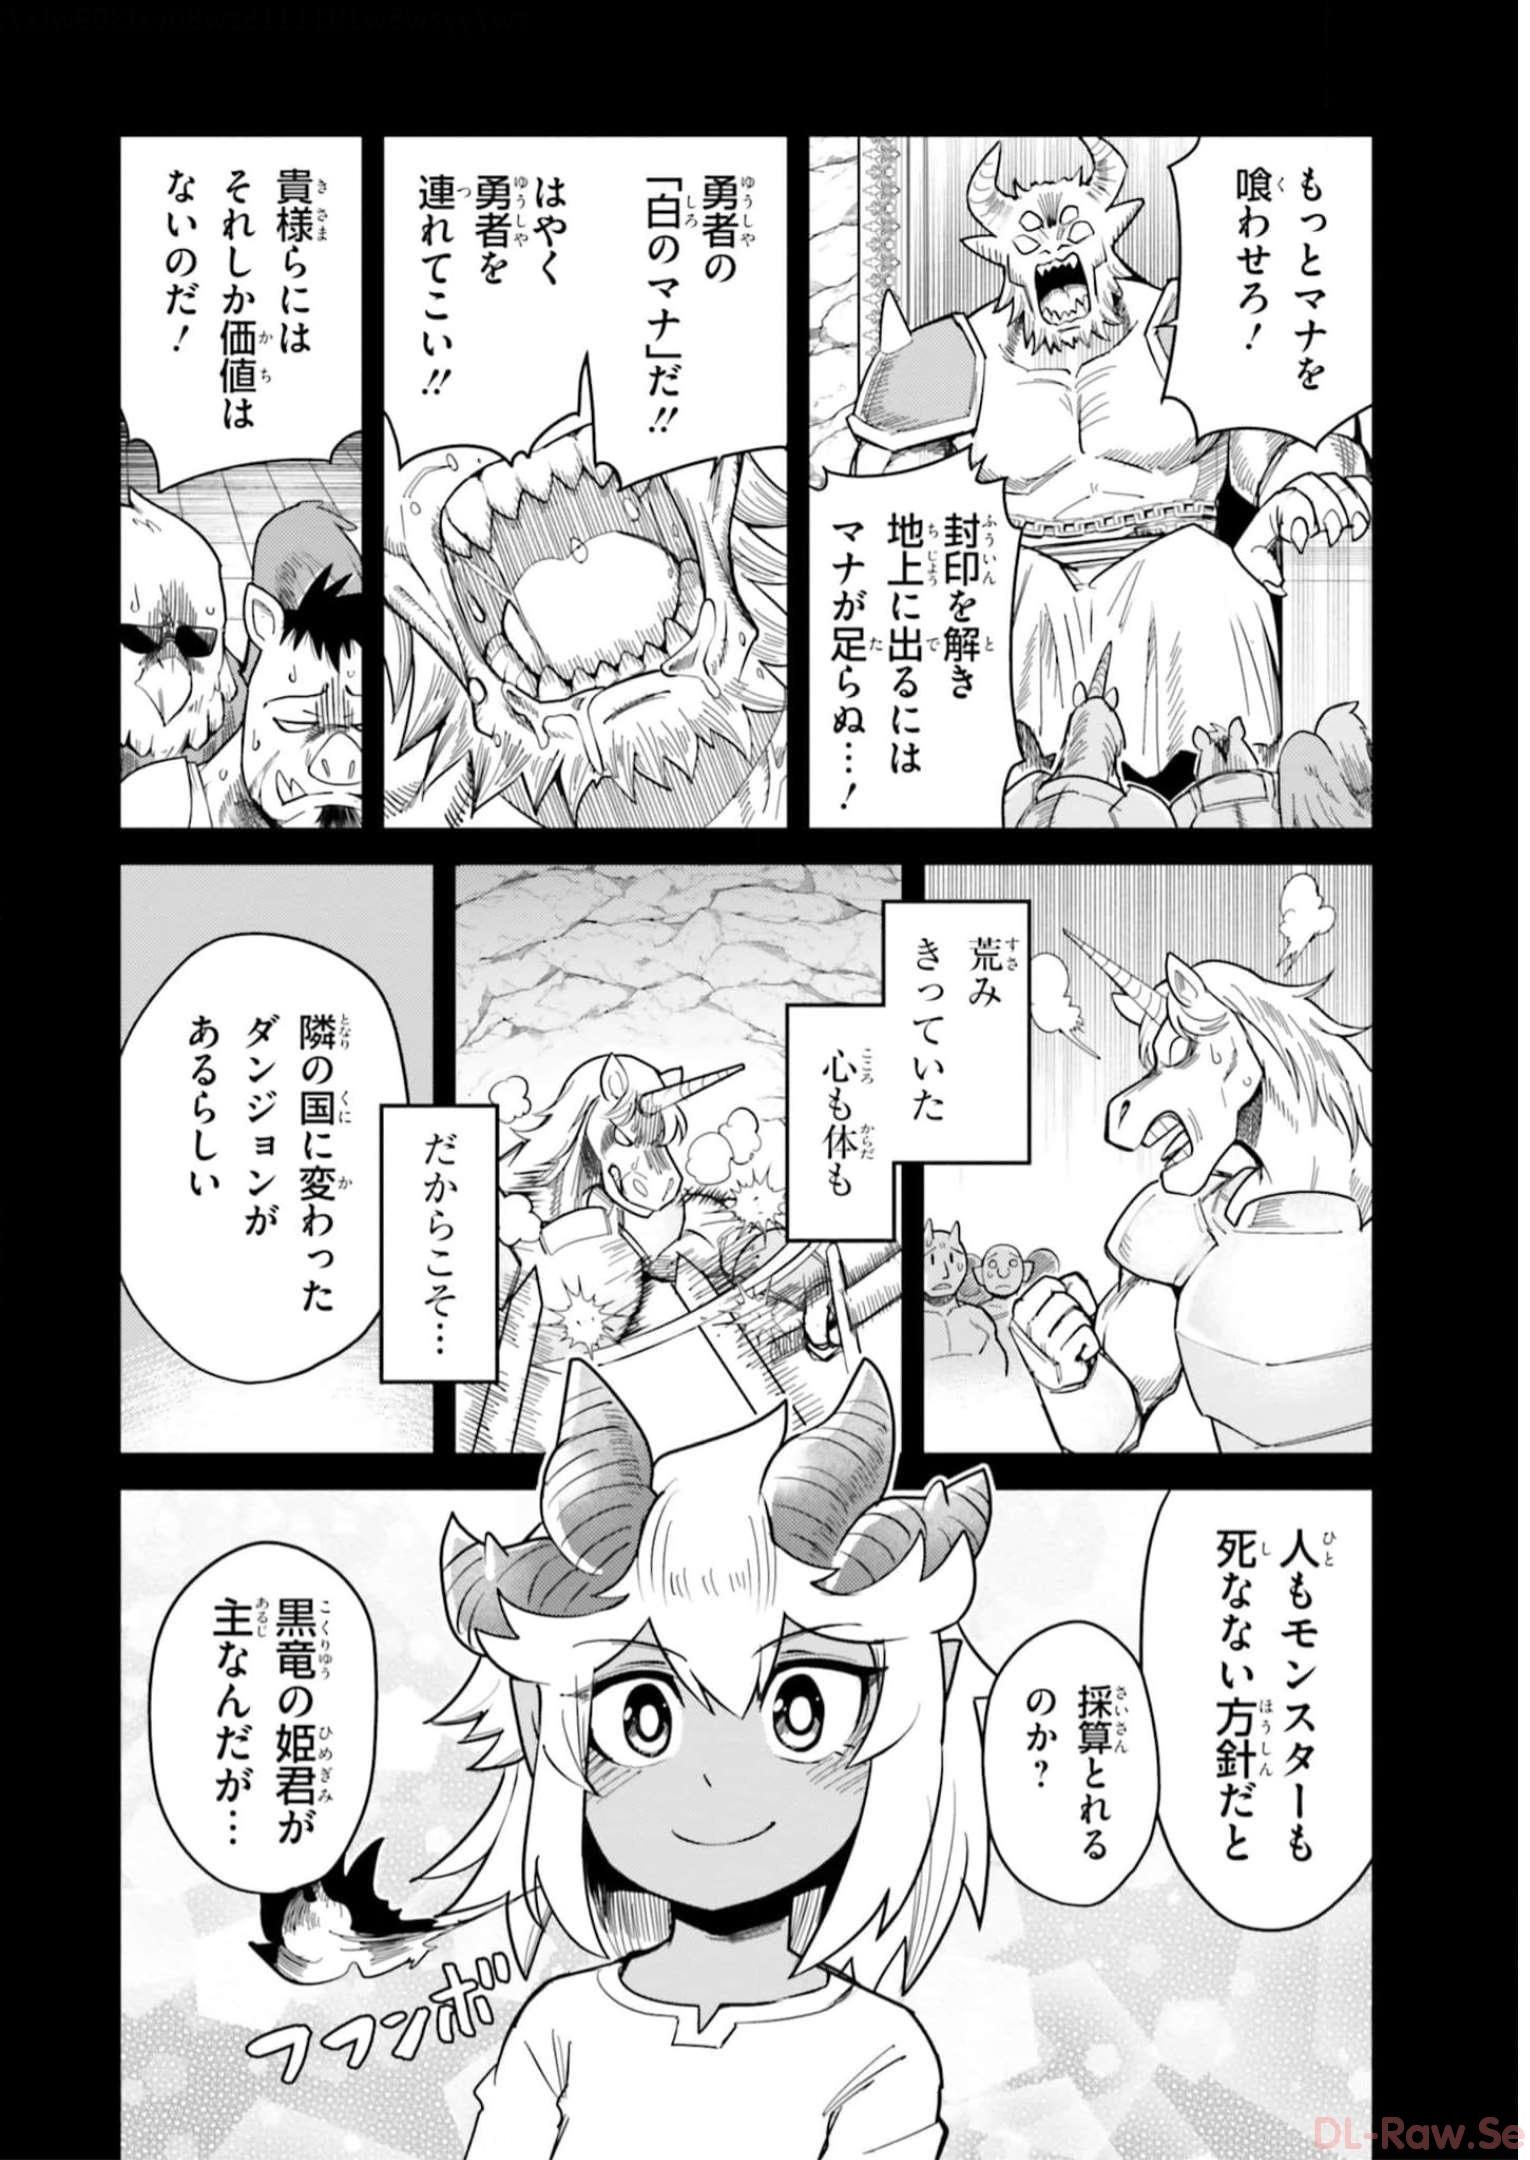 Dungeon Friends Forever Dungeon's Childhood Friend ダンジョンの幼なじみ 第22話 - Page 7